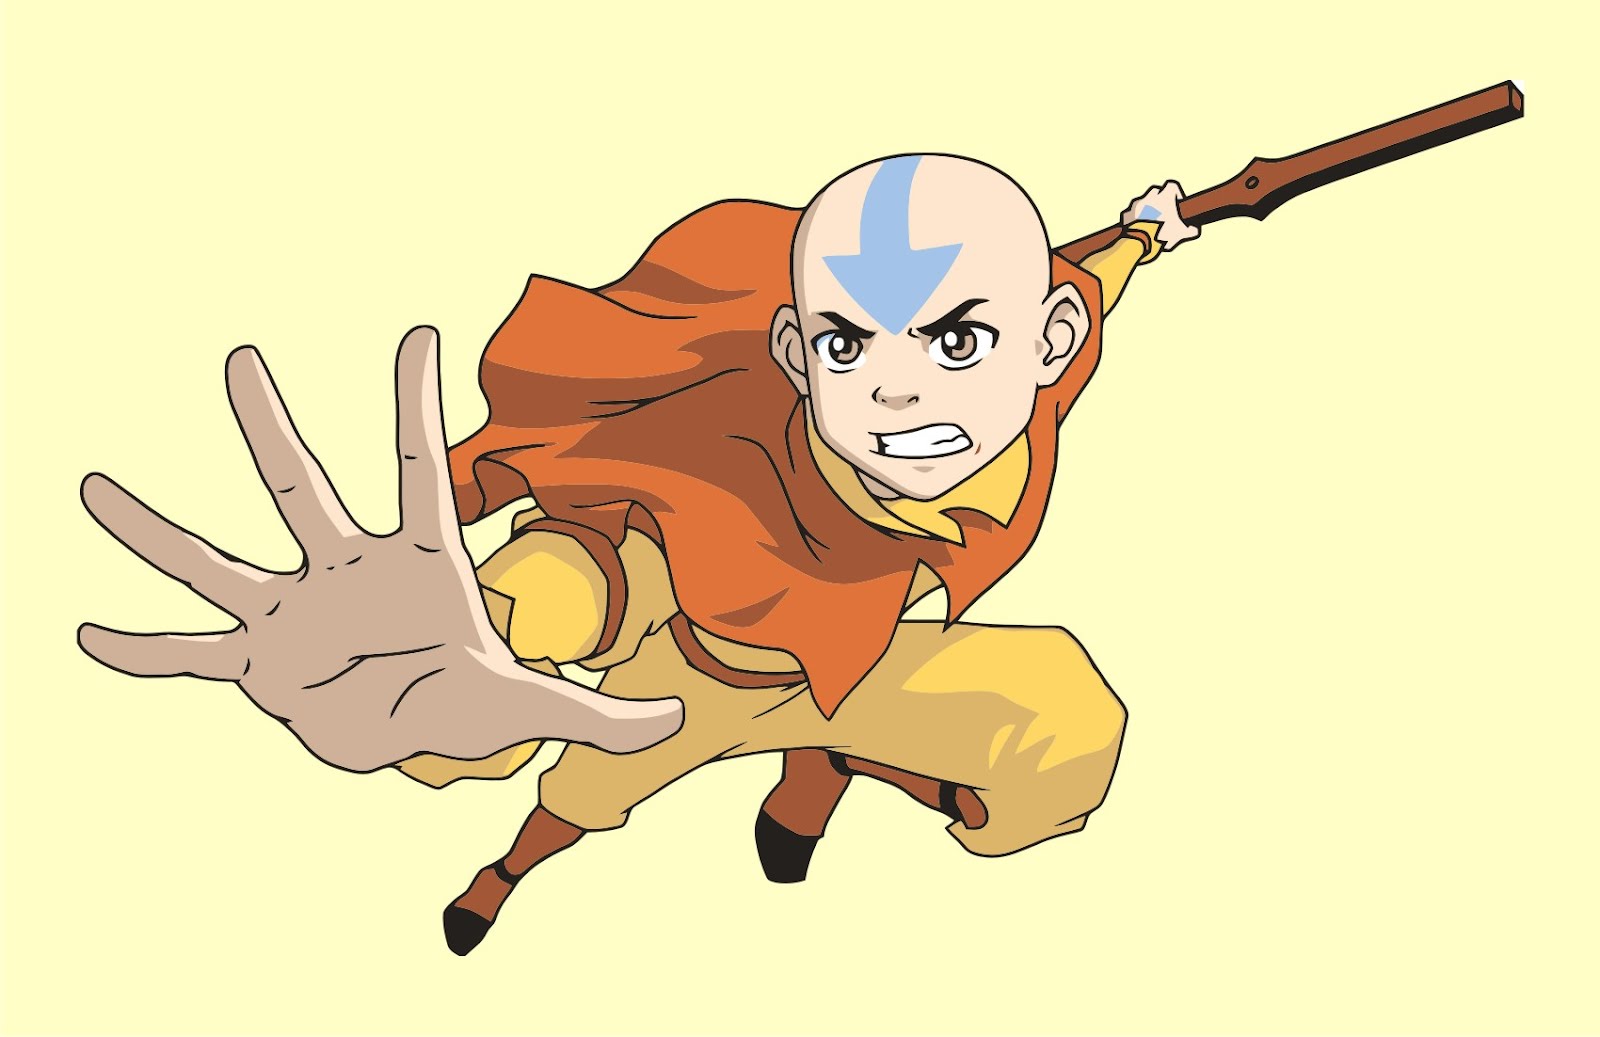 Avatar The Last Airbender Aang Character Vector Game